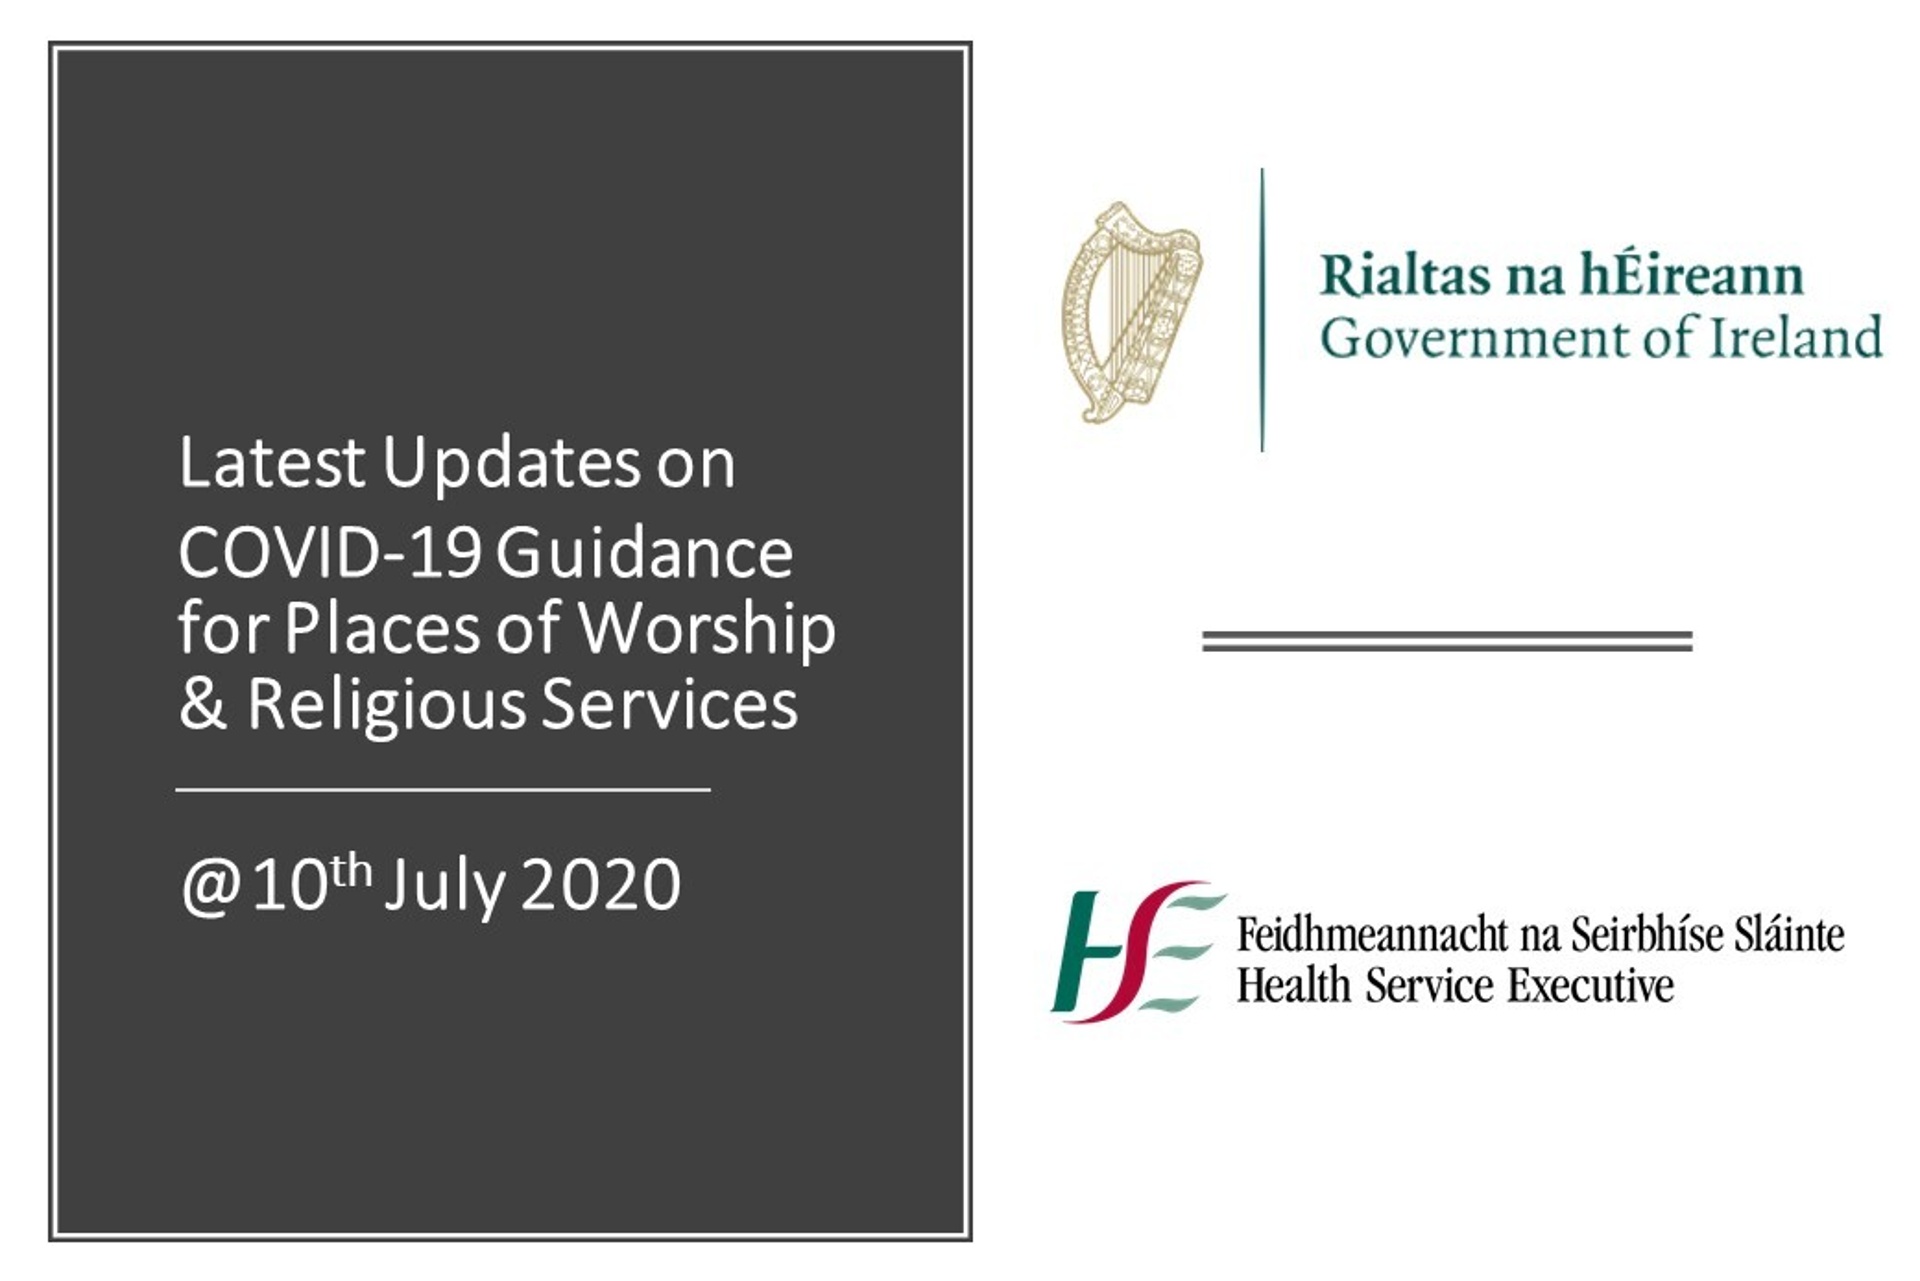 Latest Updates from the Government & HSE as of 10th July 2020